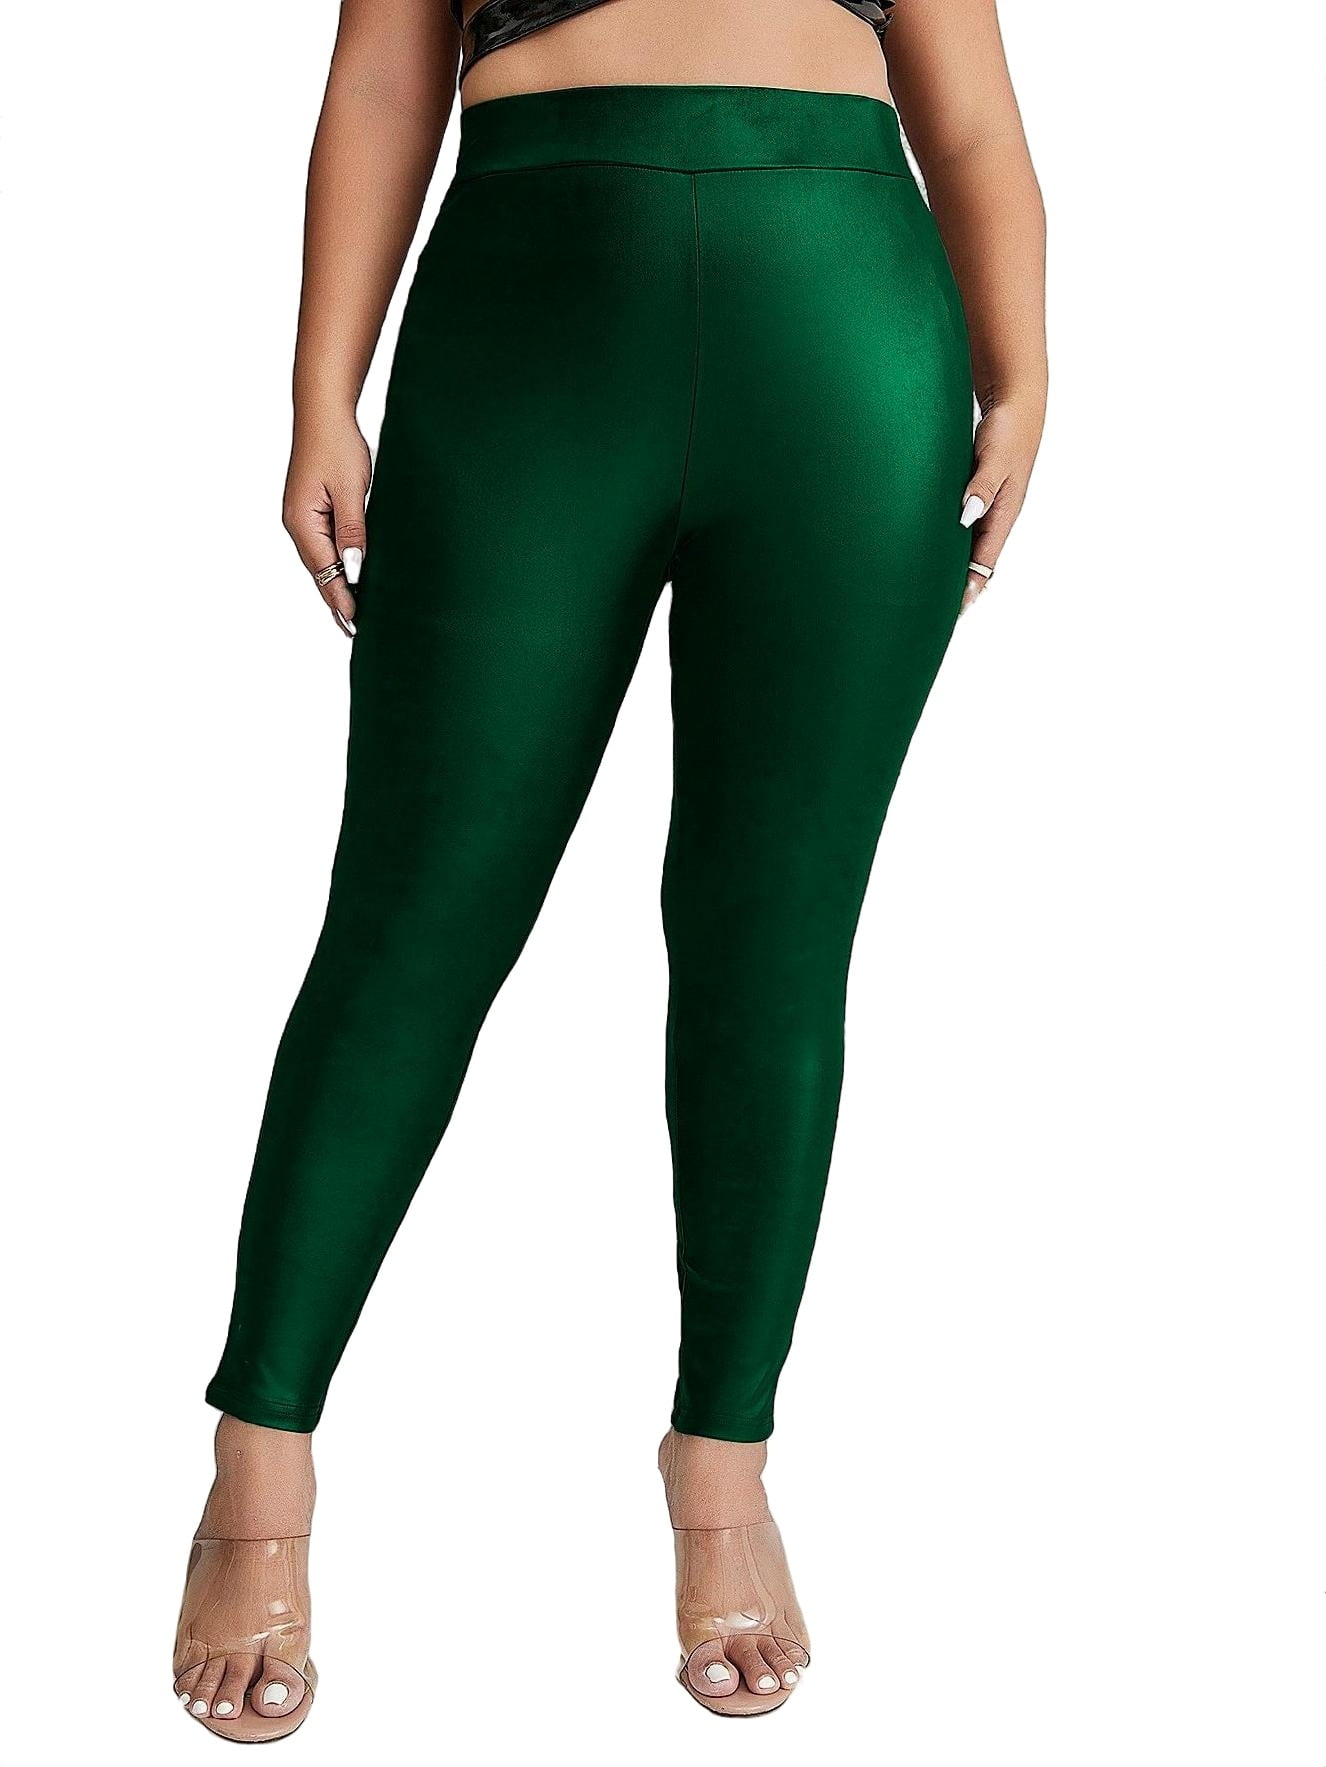 Sage Green Legging Set: UP TO 3X – The Comfy Rose Collection